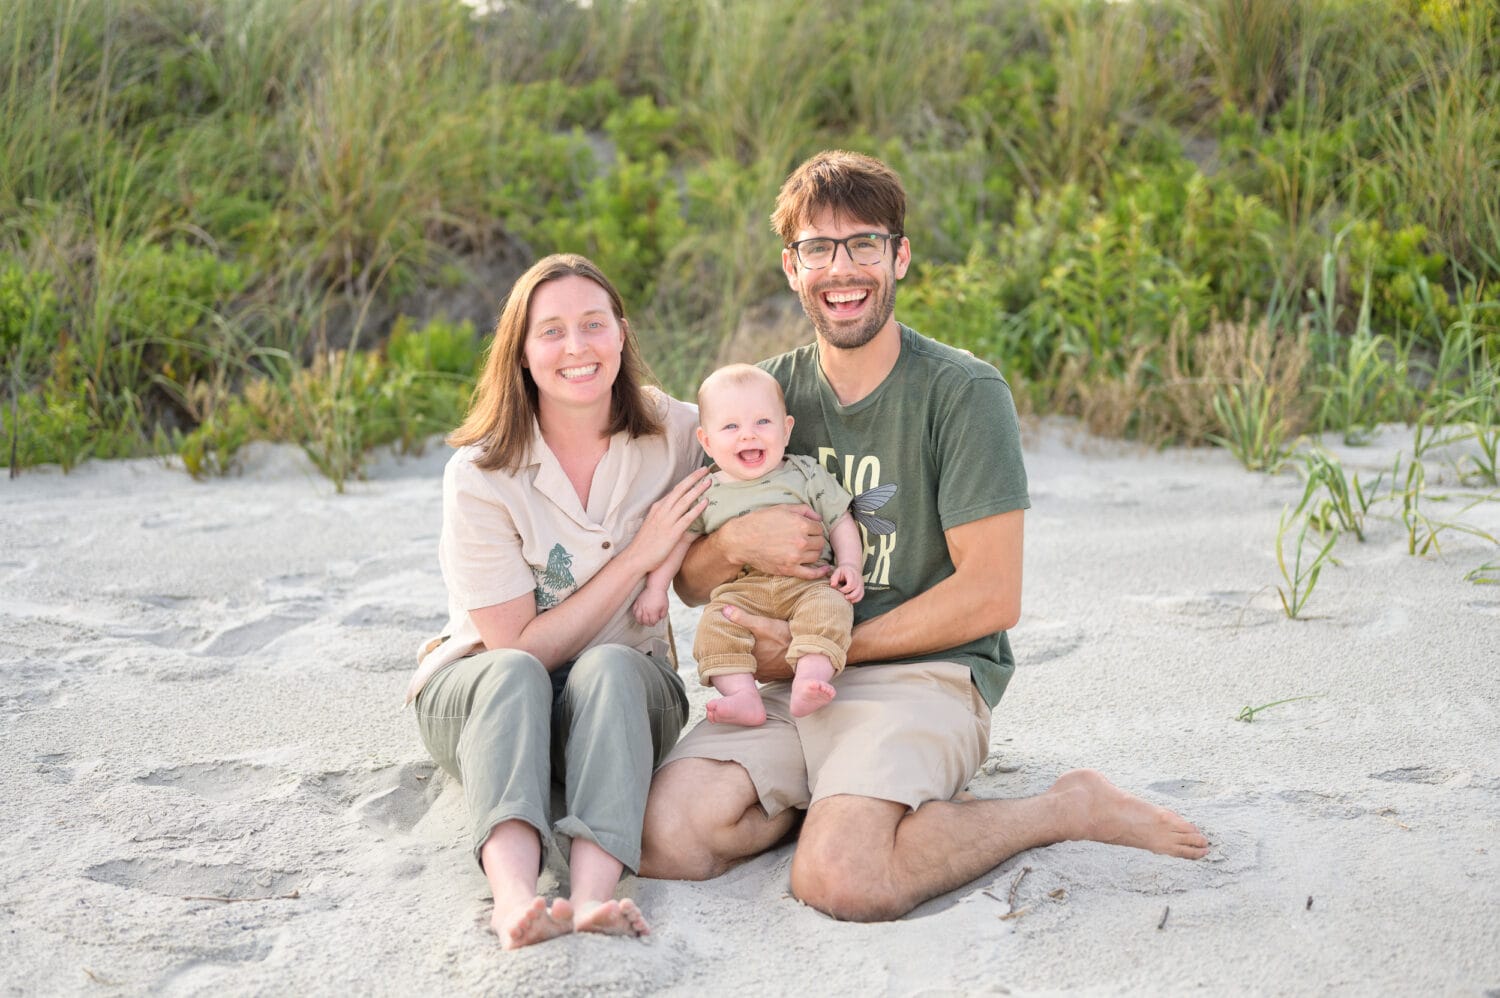 Happy baby with mom and dad by the dunes - North Myrtle Beach